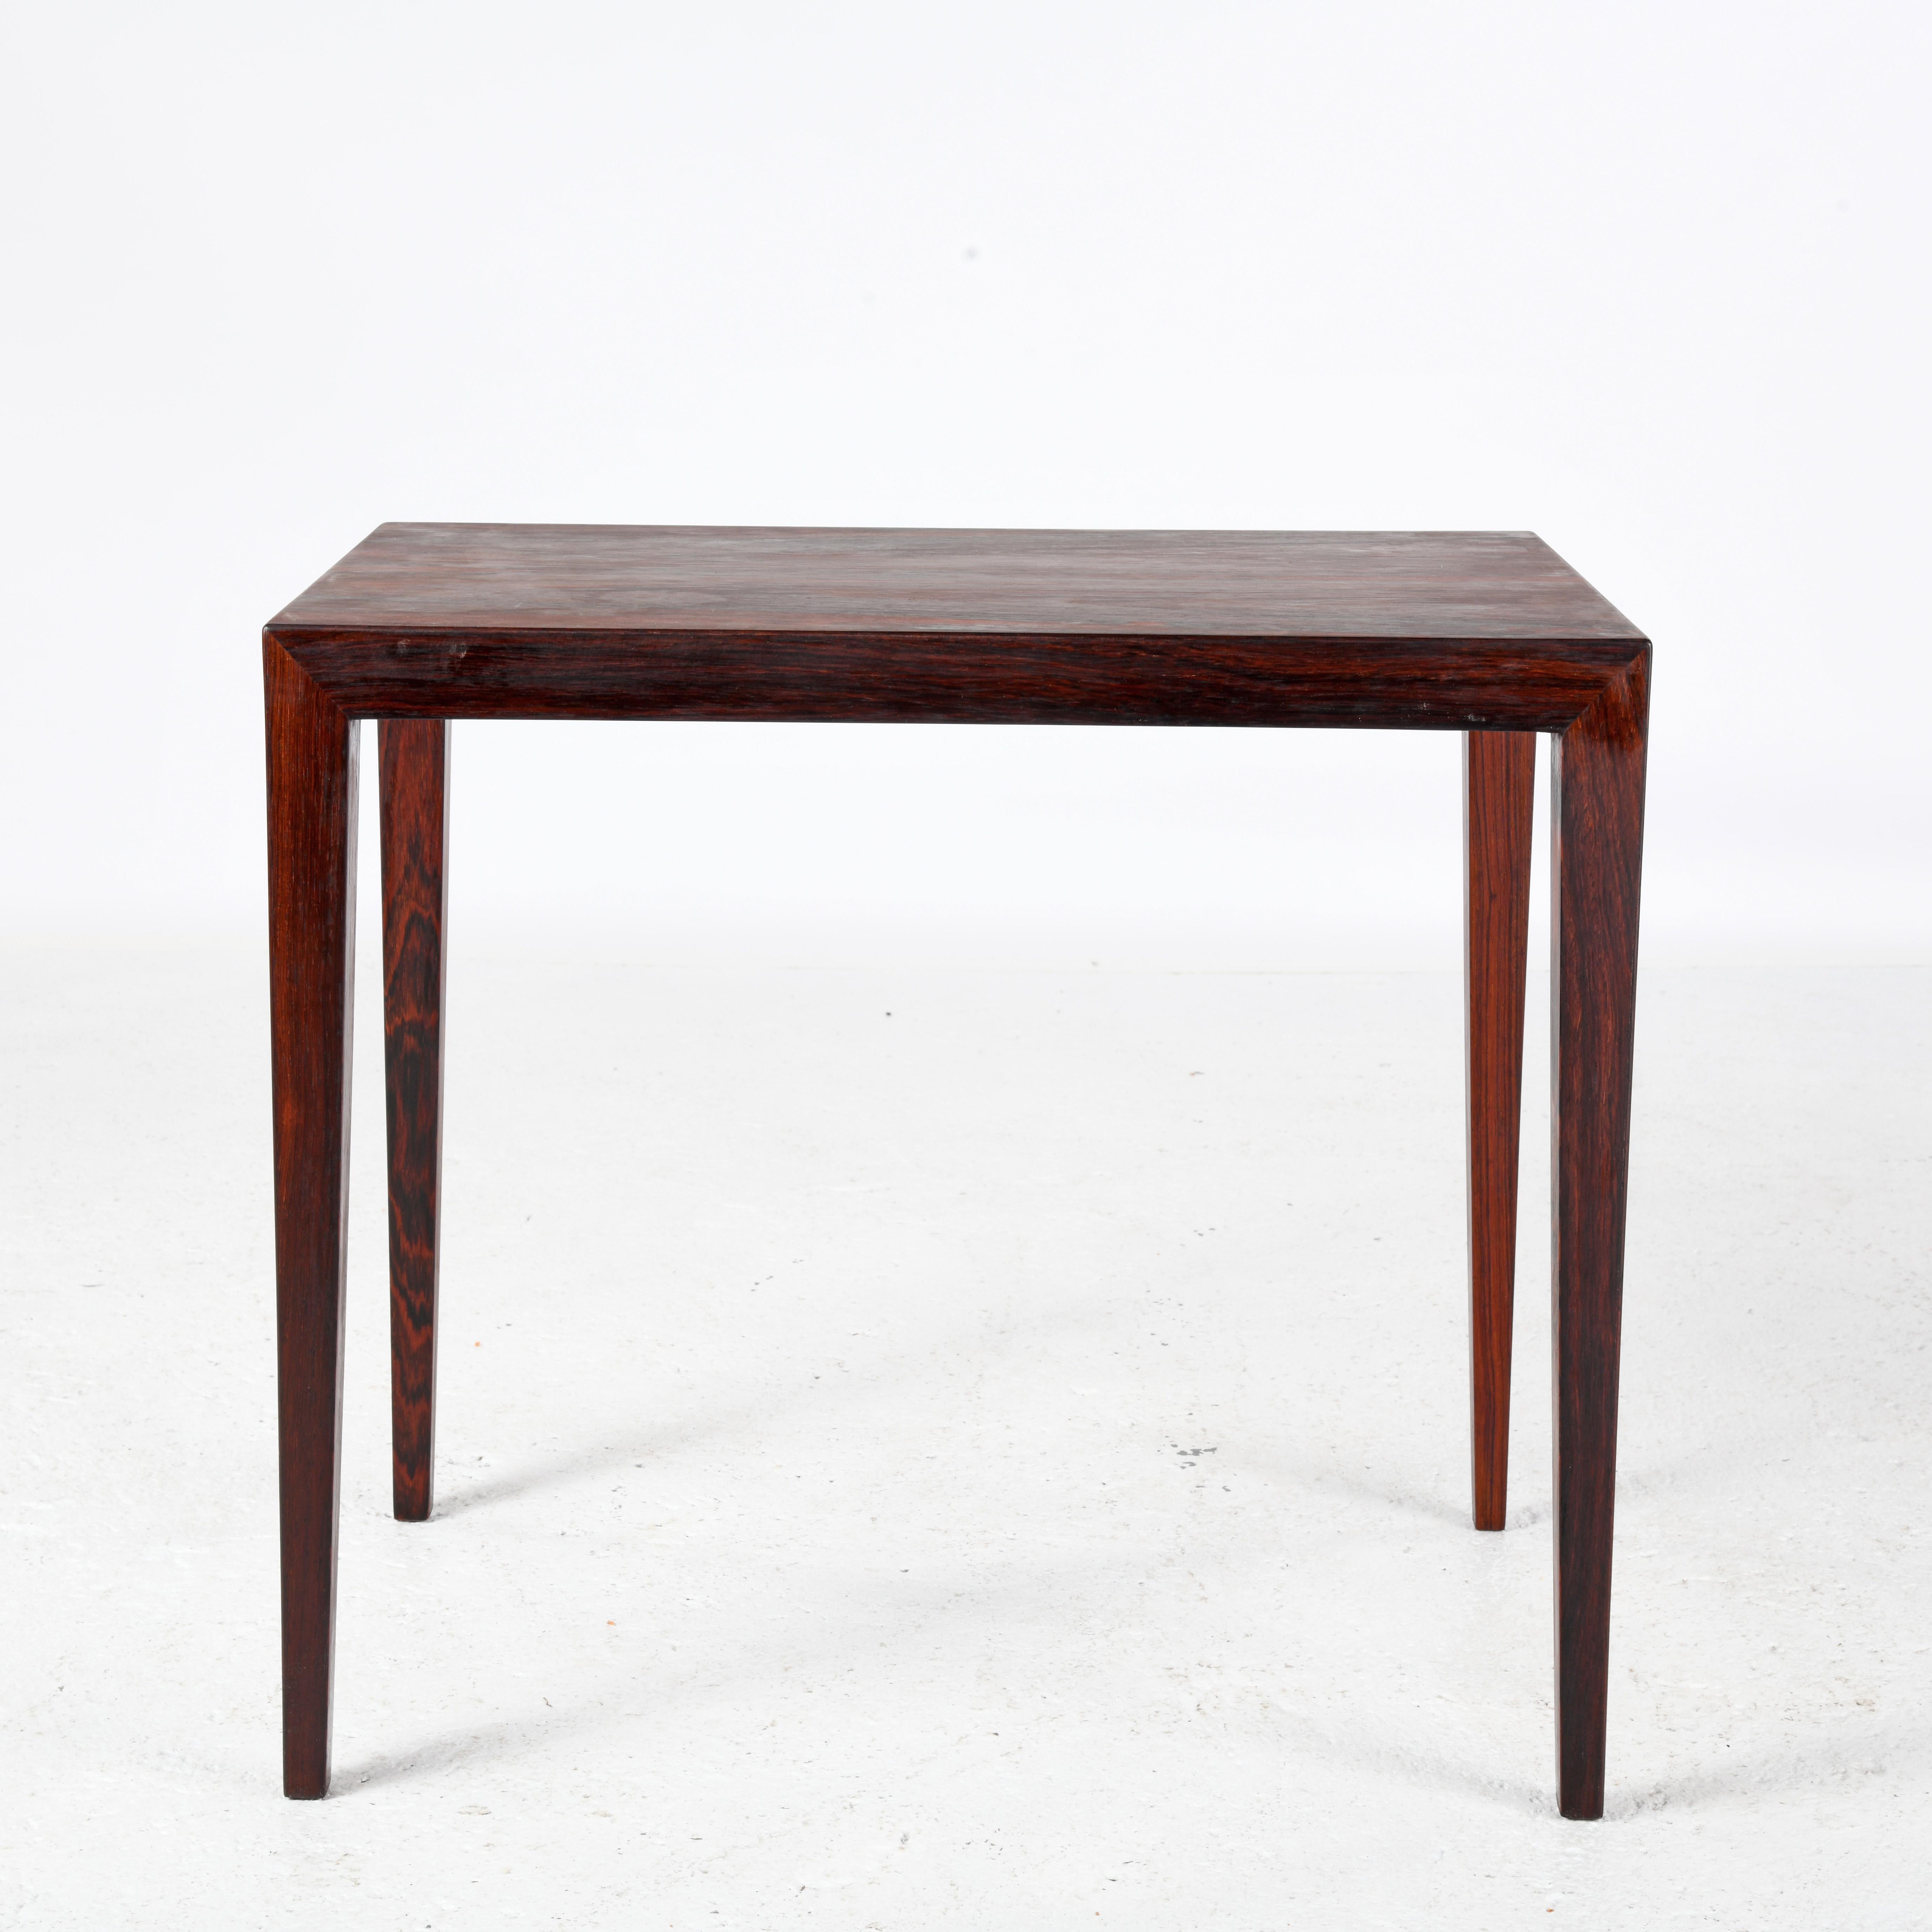 Small coffee table, designed by Severin Hansen (1903-1979) in the 1960s, published by Haslev Møbelfabrik in Denmark.
A second table of the same model is also available.
Severin Hansen is known for his extremely pure design, in which line is